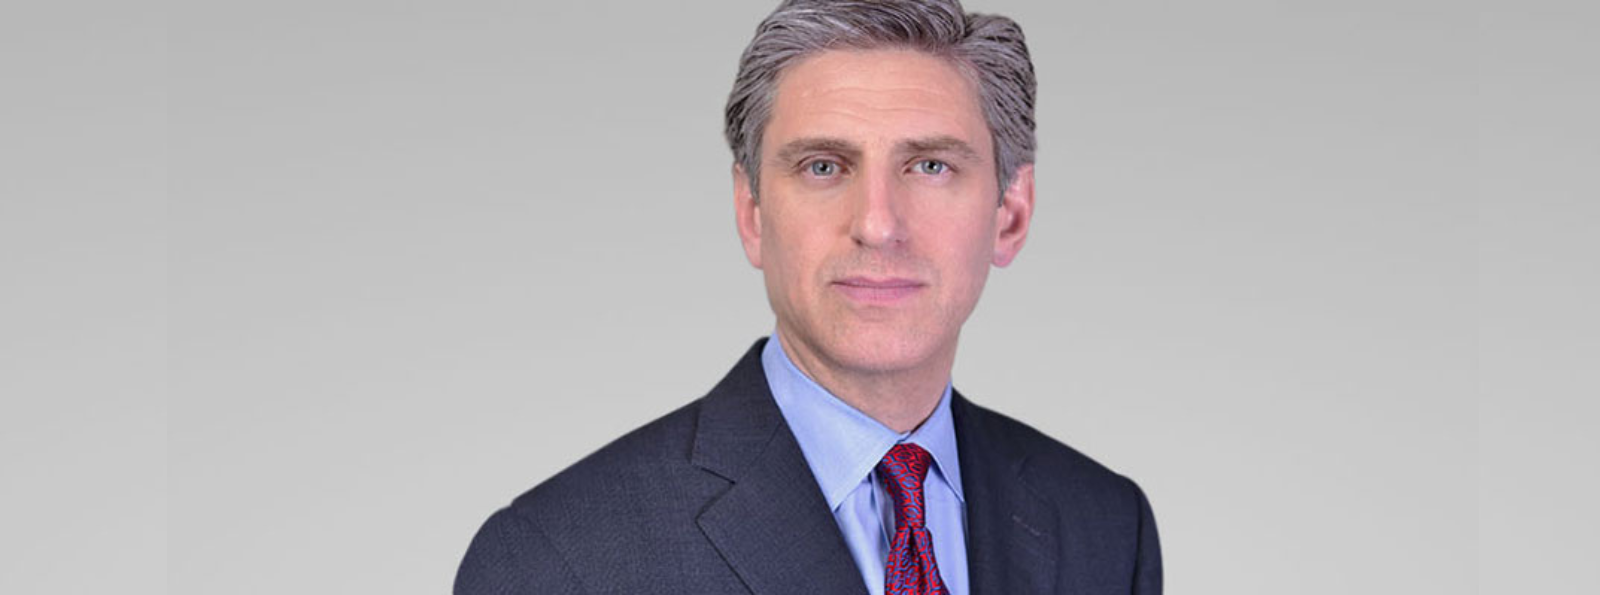 Greg Margolies, partner at Ares Management